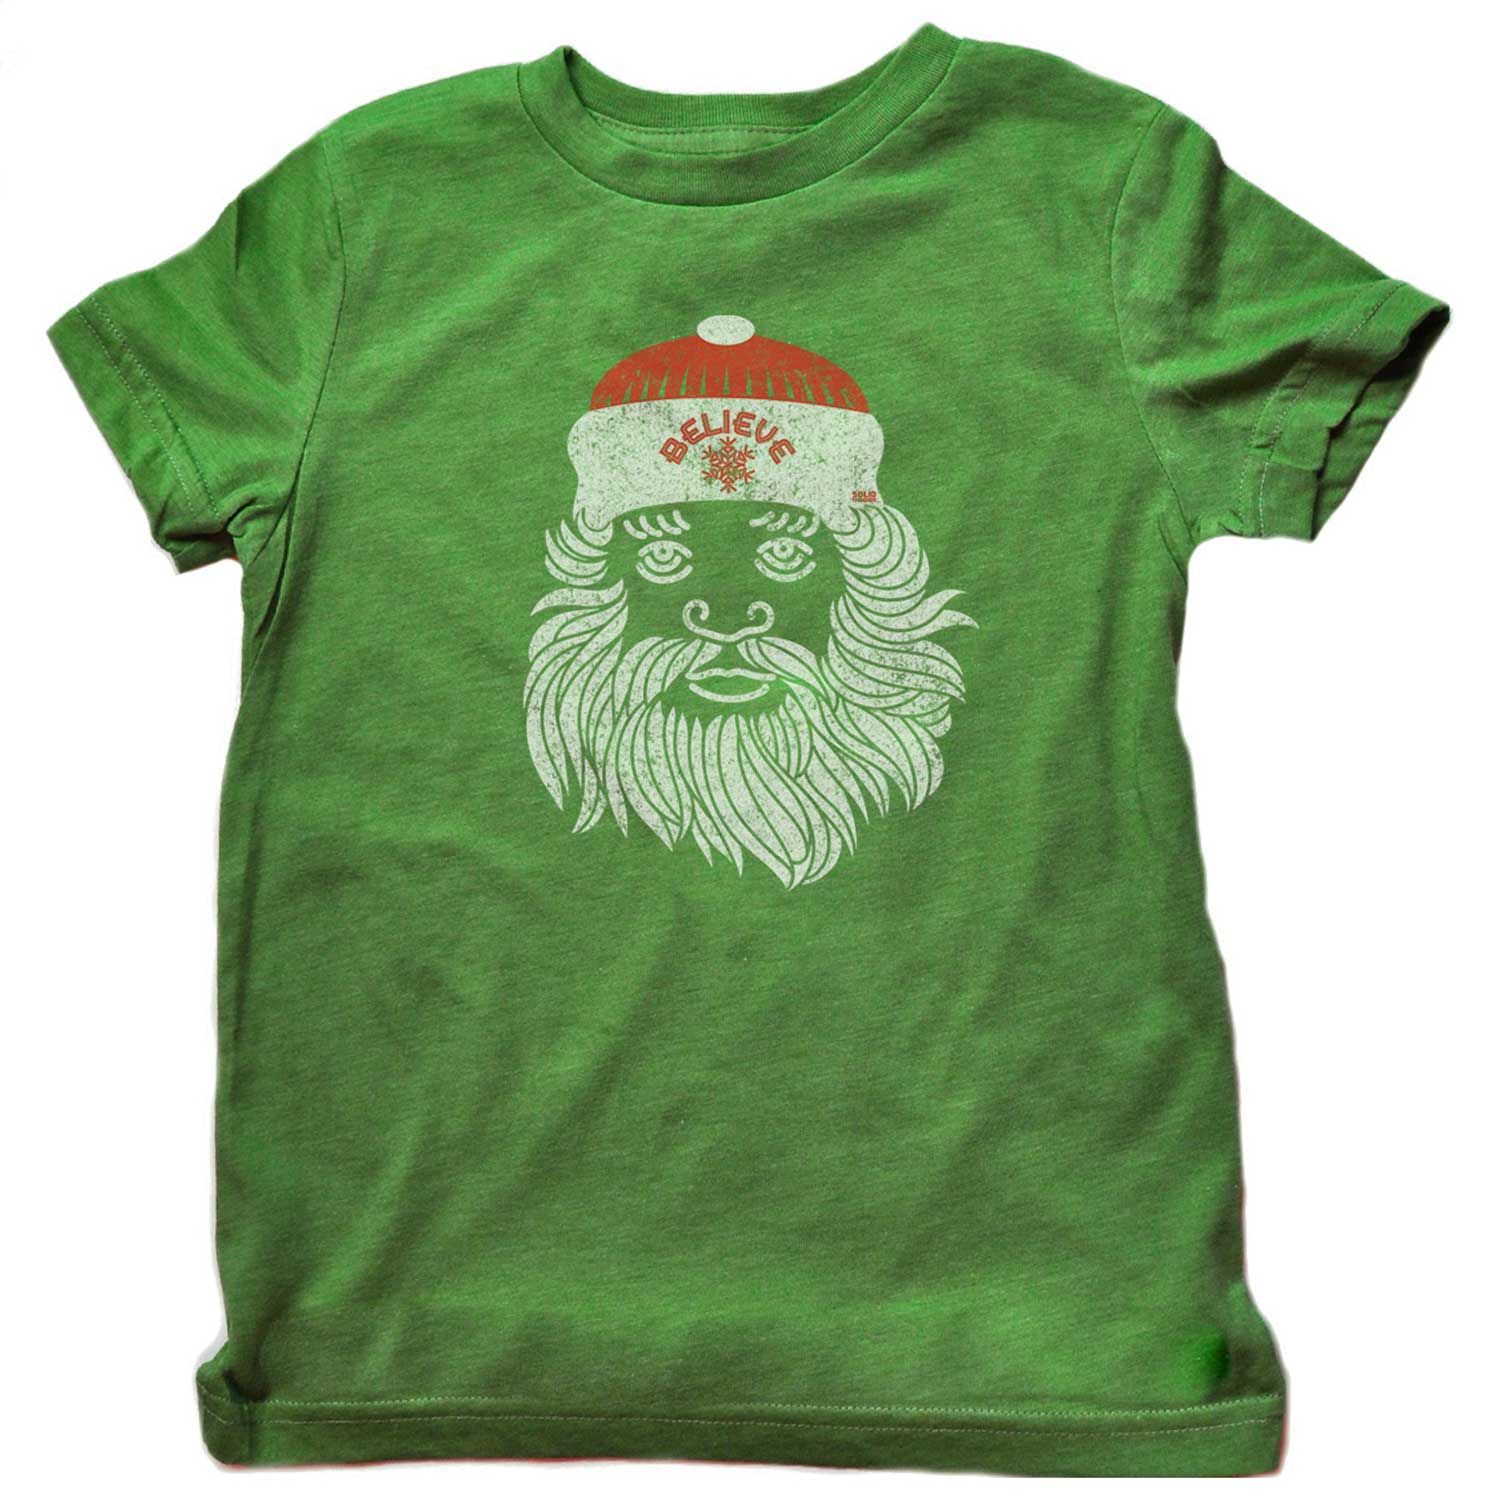 Kids Believe in Santa Cool Retro T-shirt | Funny Christmas Graphic Tee | Solid Threads